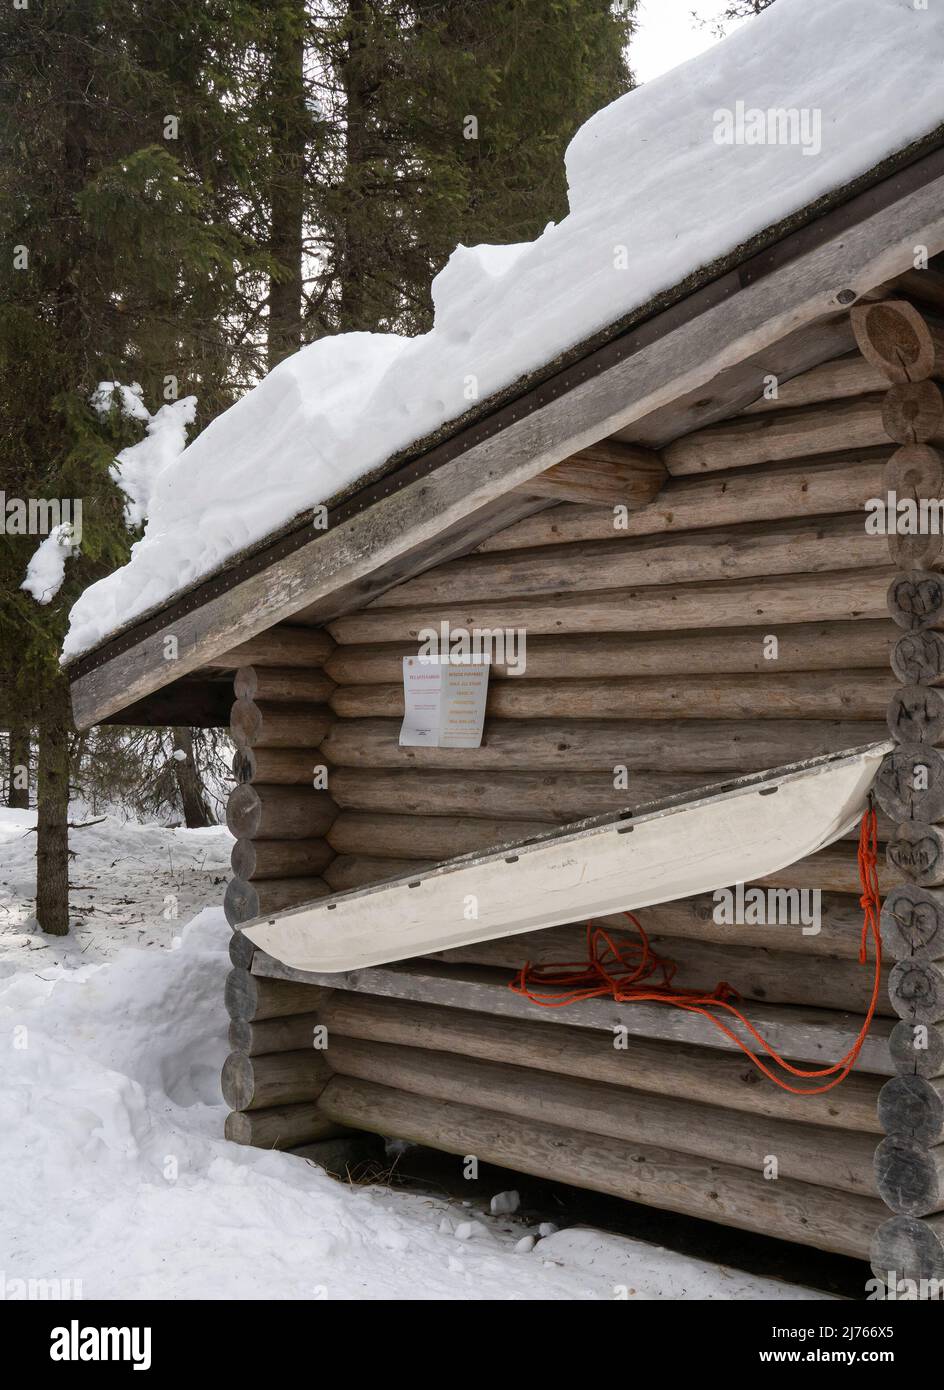 Rovaniemi, Finland - March 19th, 2022: A rescue sledge on the wall of a log cabin in a snowy forest in Finland. Stock Photo